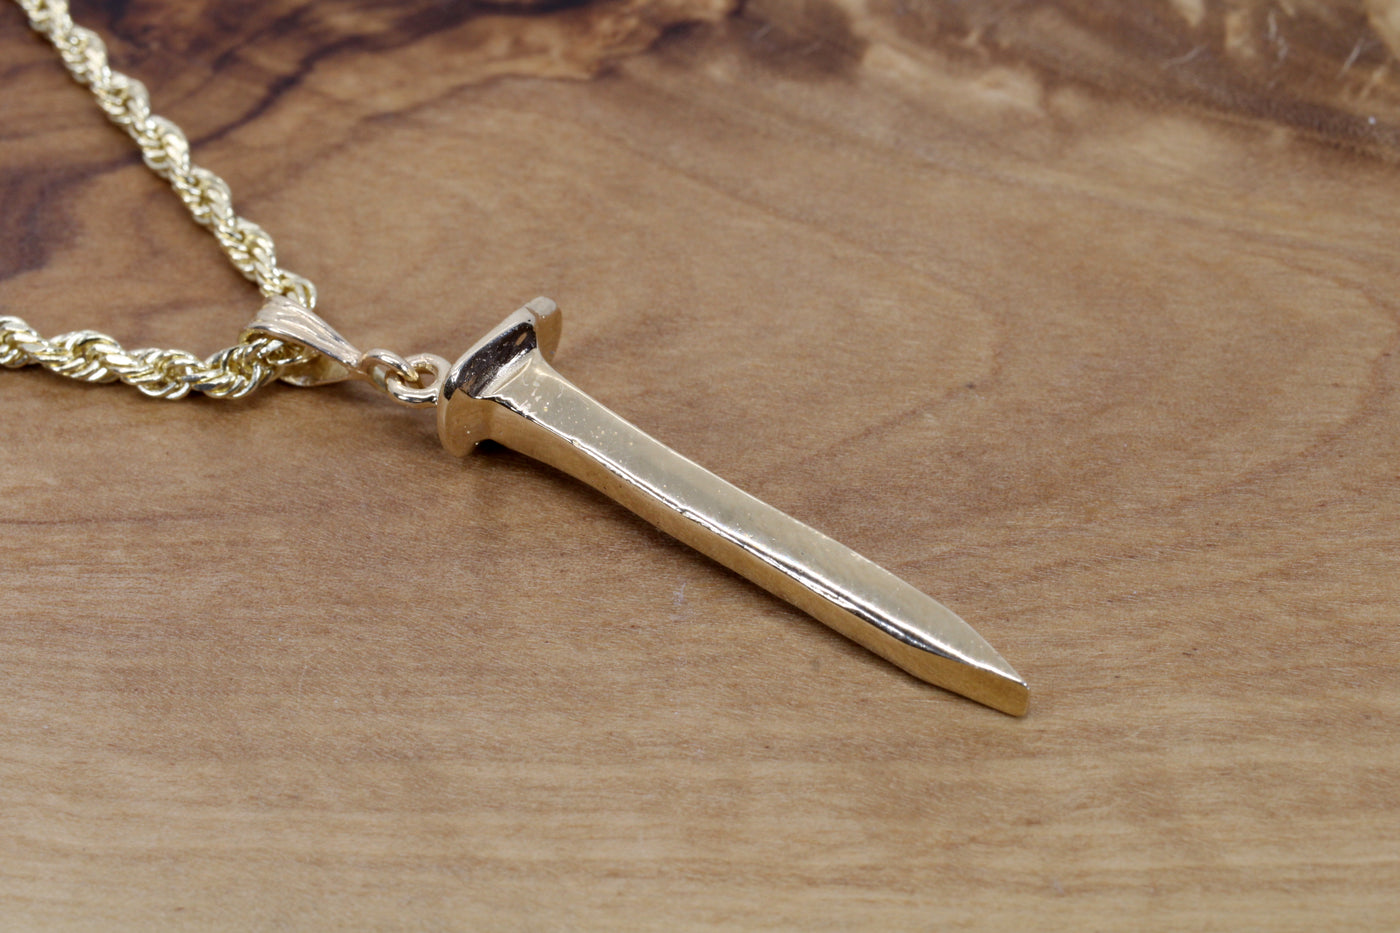 Our skinny classic railroad spike plated in 14k gold is a must